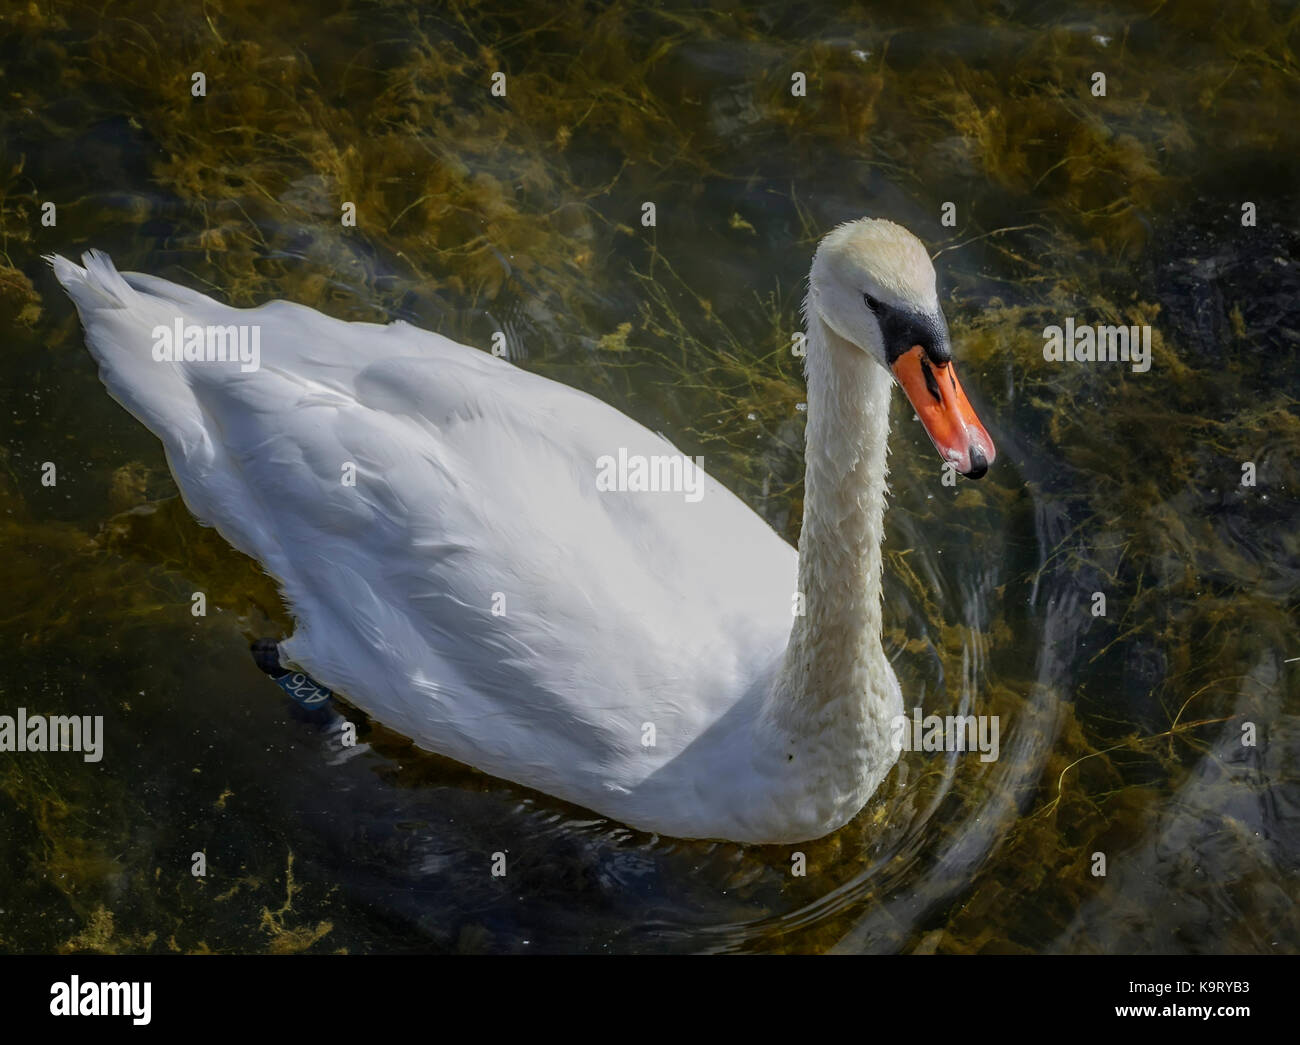 Adult white swan floats in clear water Stock Photo